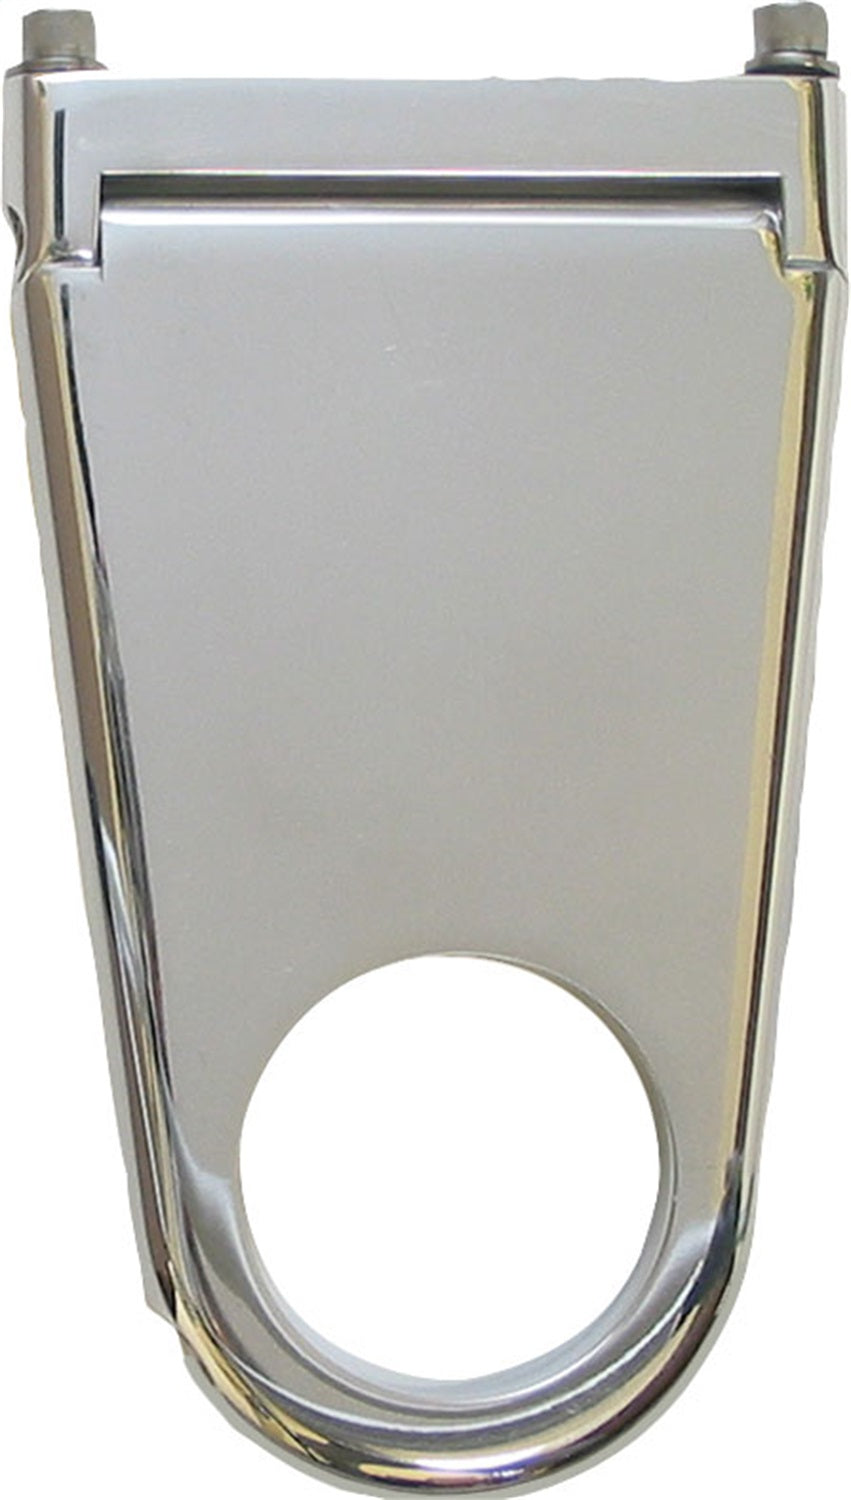 Borgeson Column Drop Blank Style 2-1/4in. Column X 3in. Drop Polished Aluminum 911223